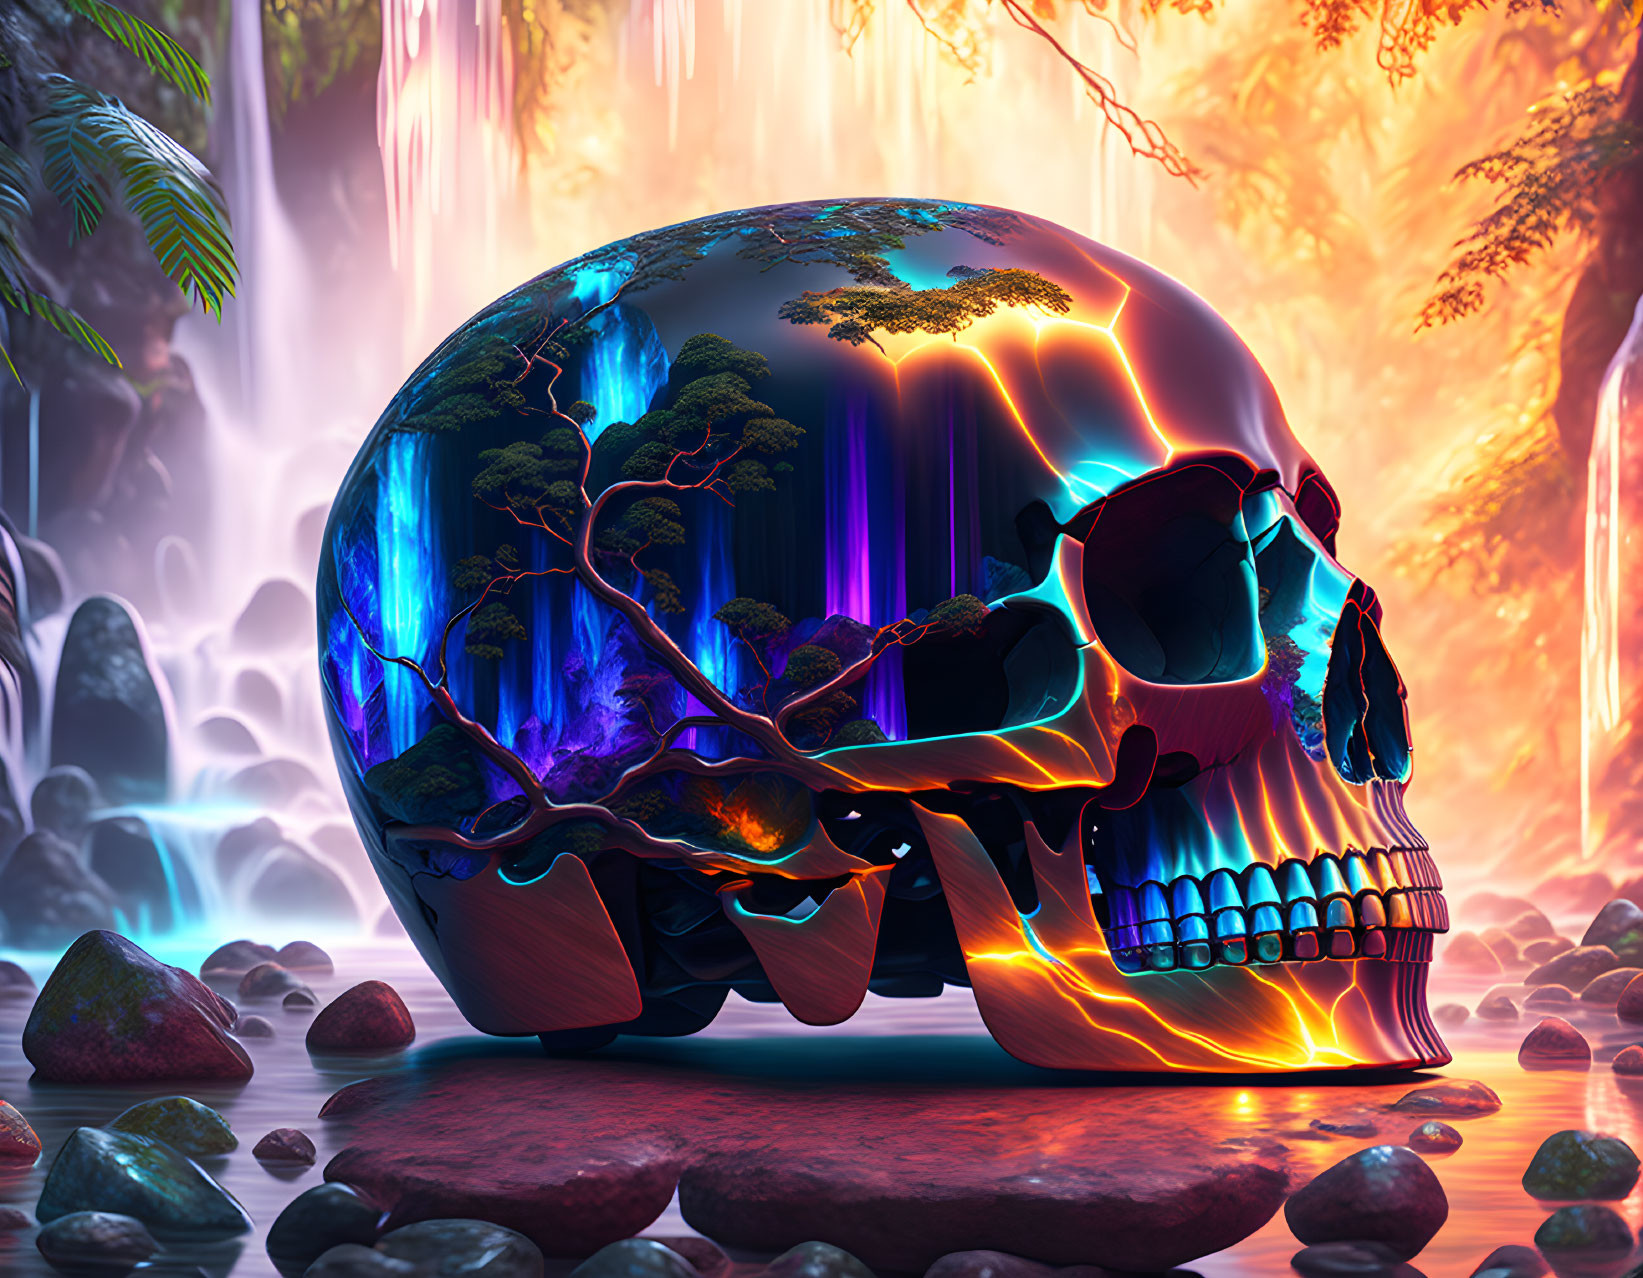 Neon-lit skull with forest and waterfall reflection in rocky landscape